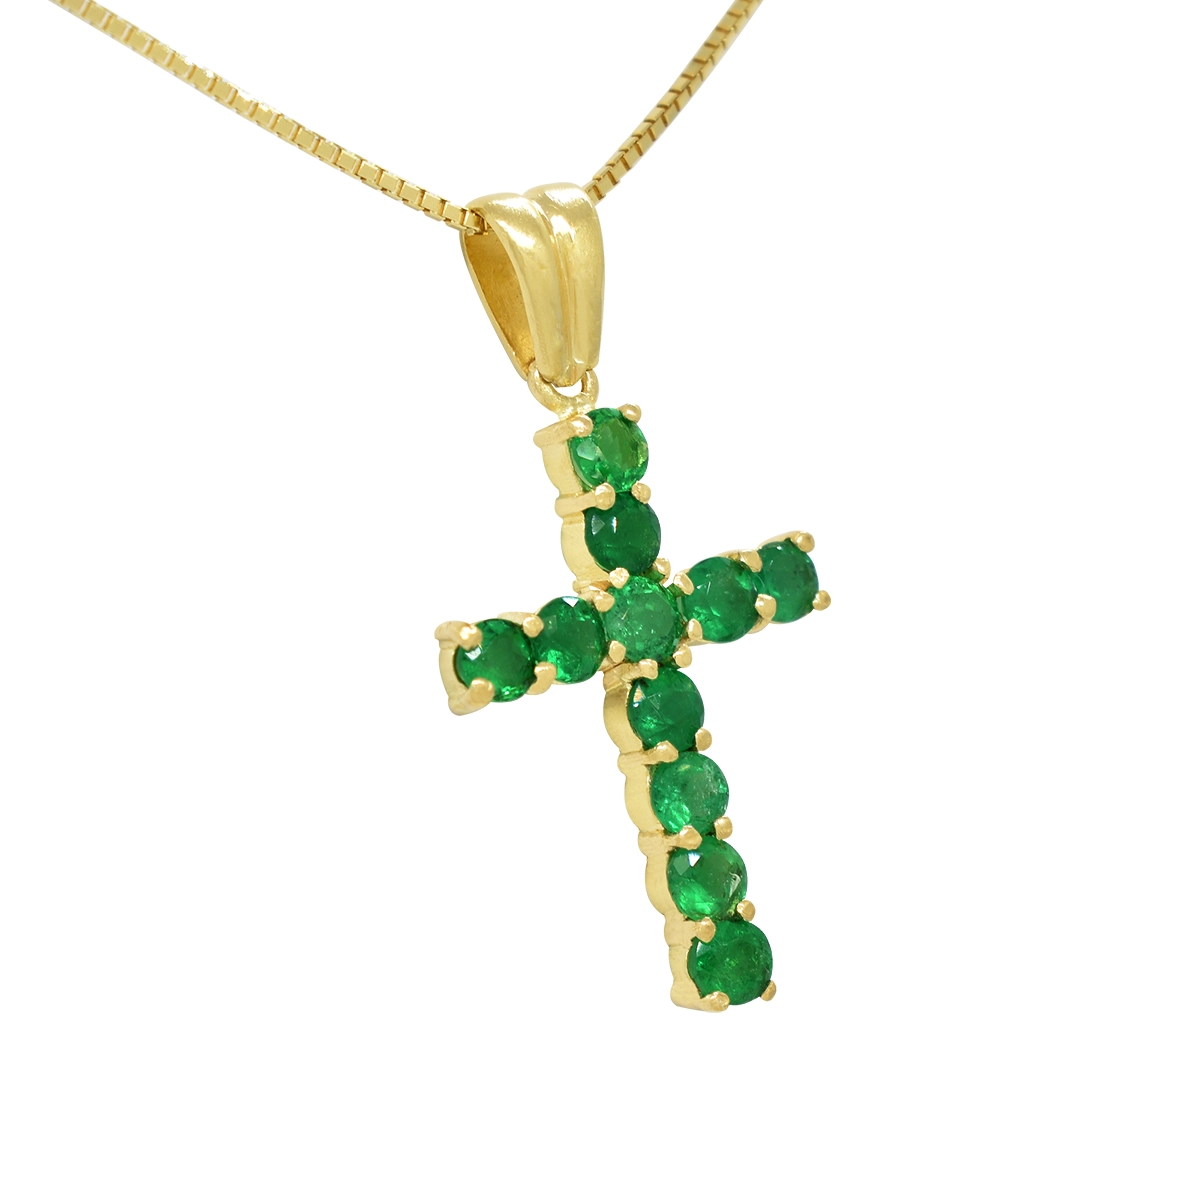 Cross pendant with round cut natural emeralds with vivid green color set in strong and durable prongs with an antique jewelry hint in its design